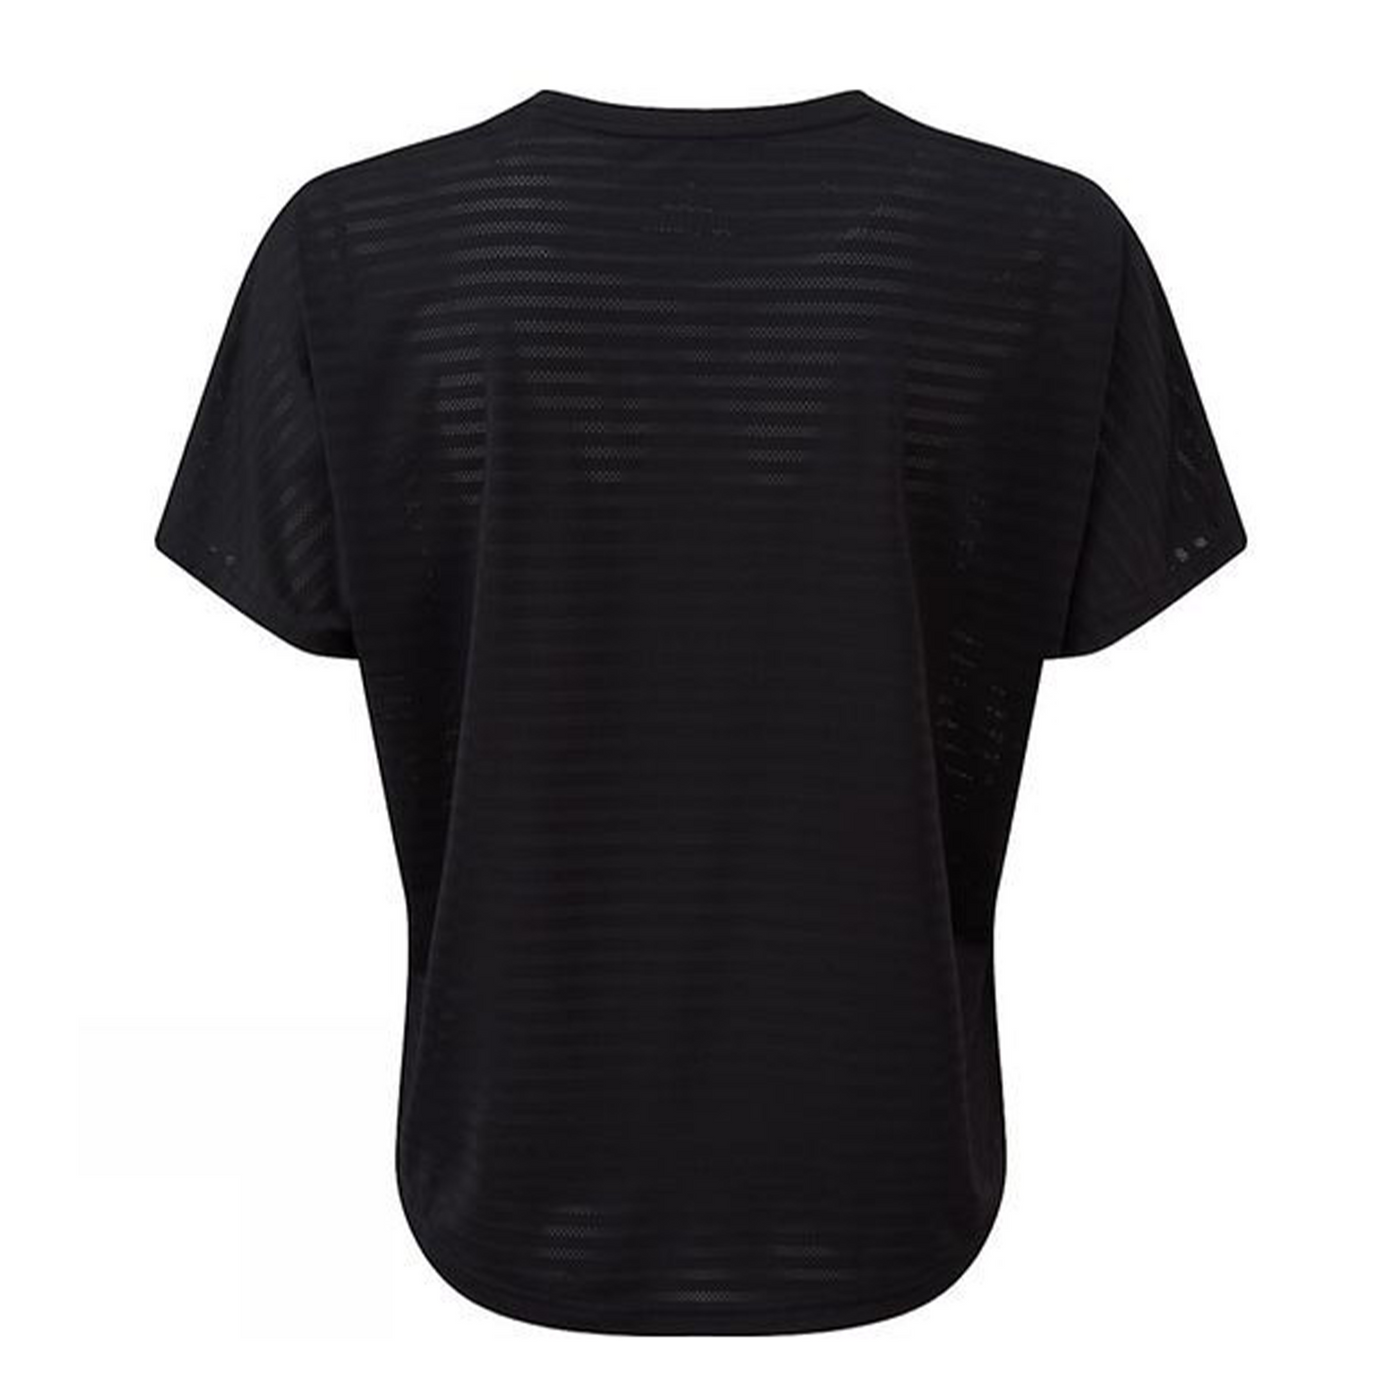 RonHill Womens Life Flow S/S Tee - All Black